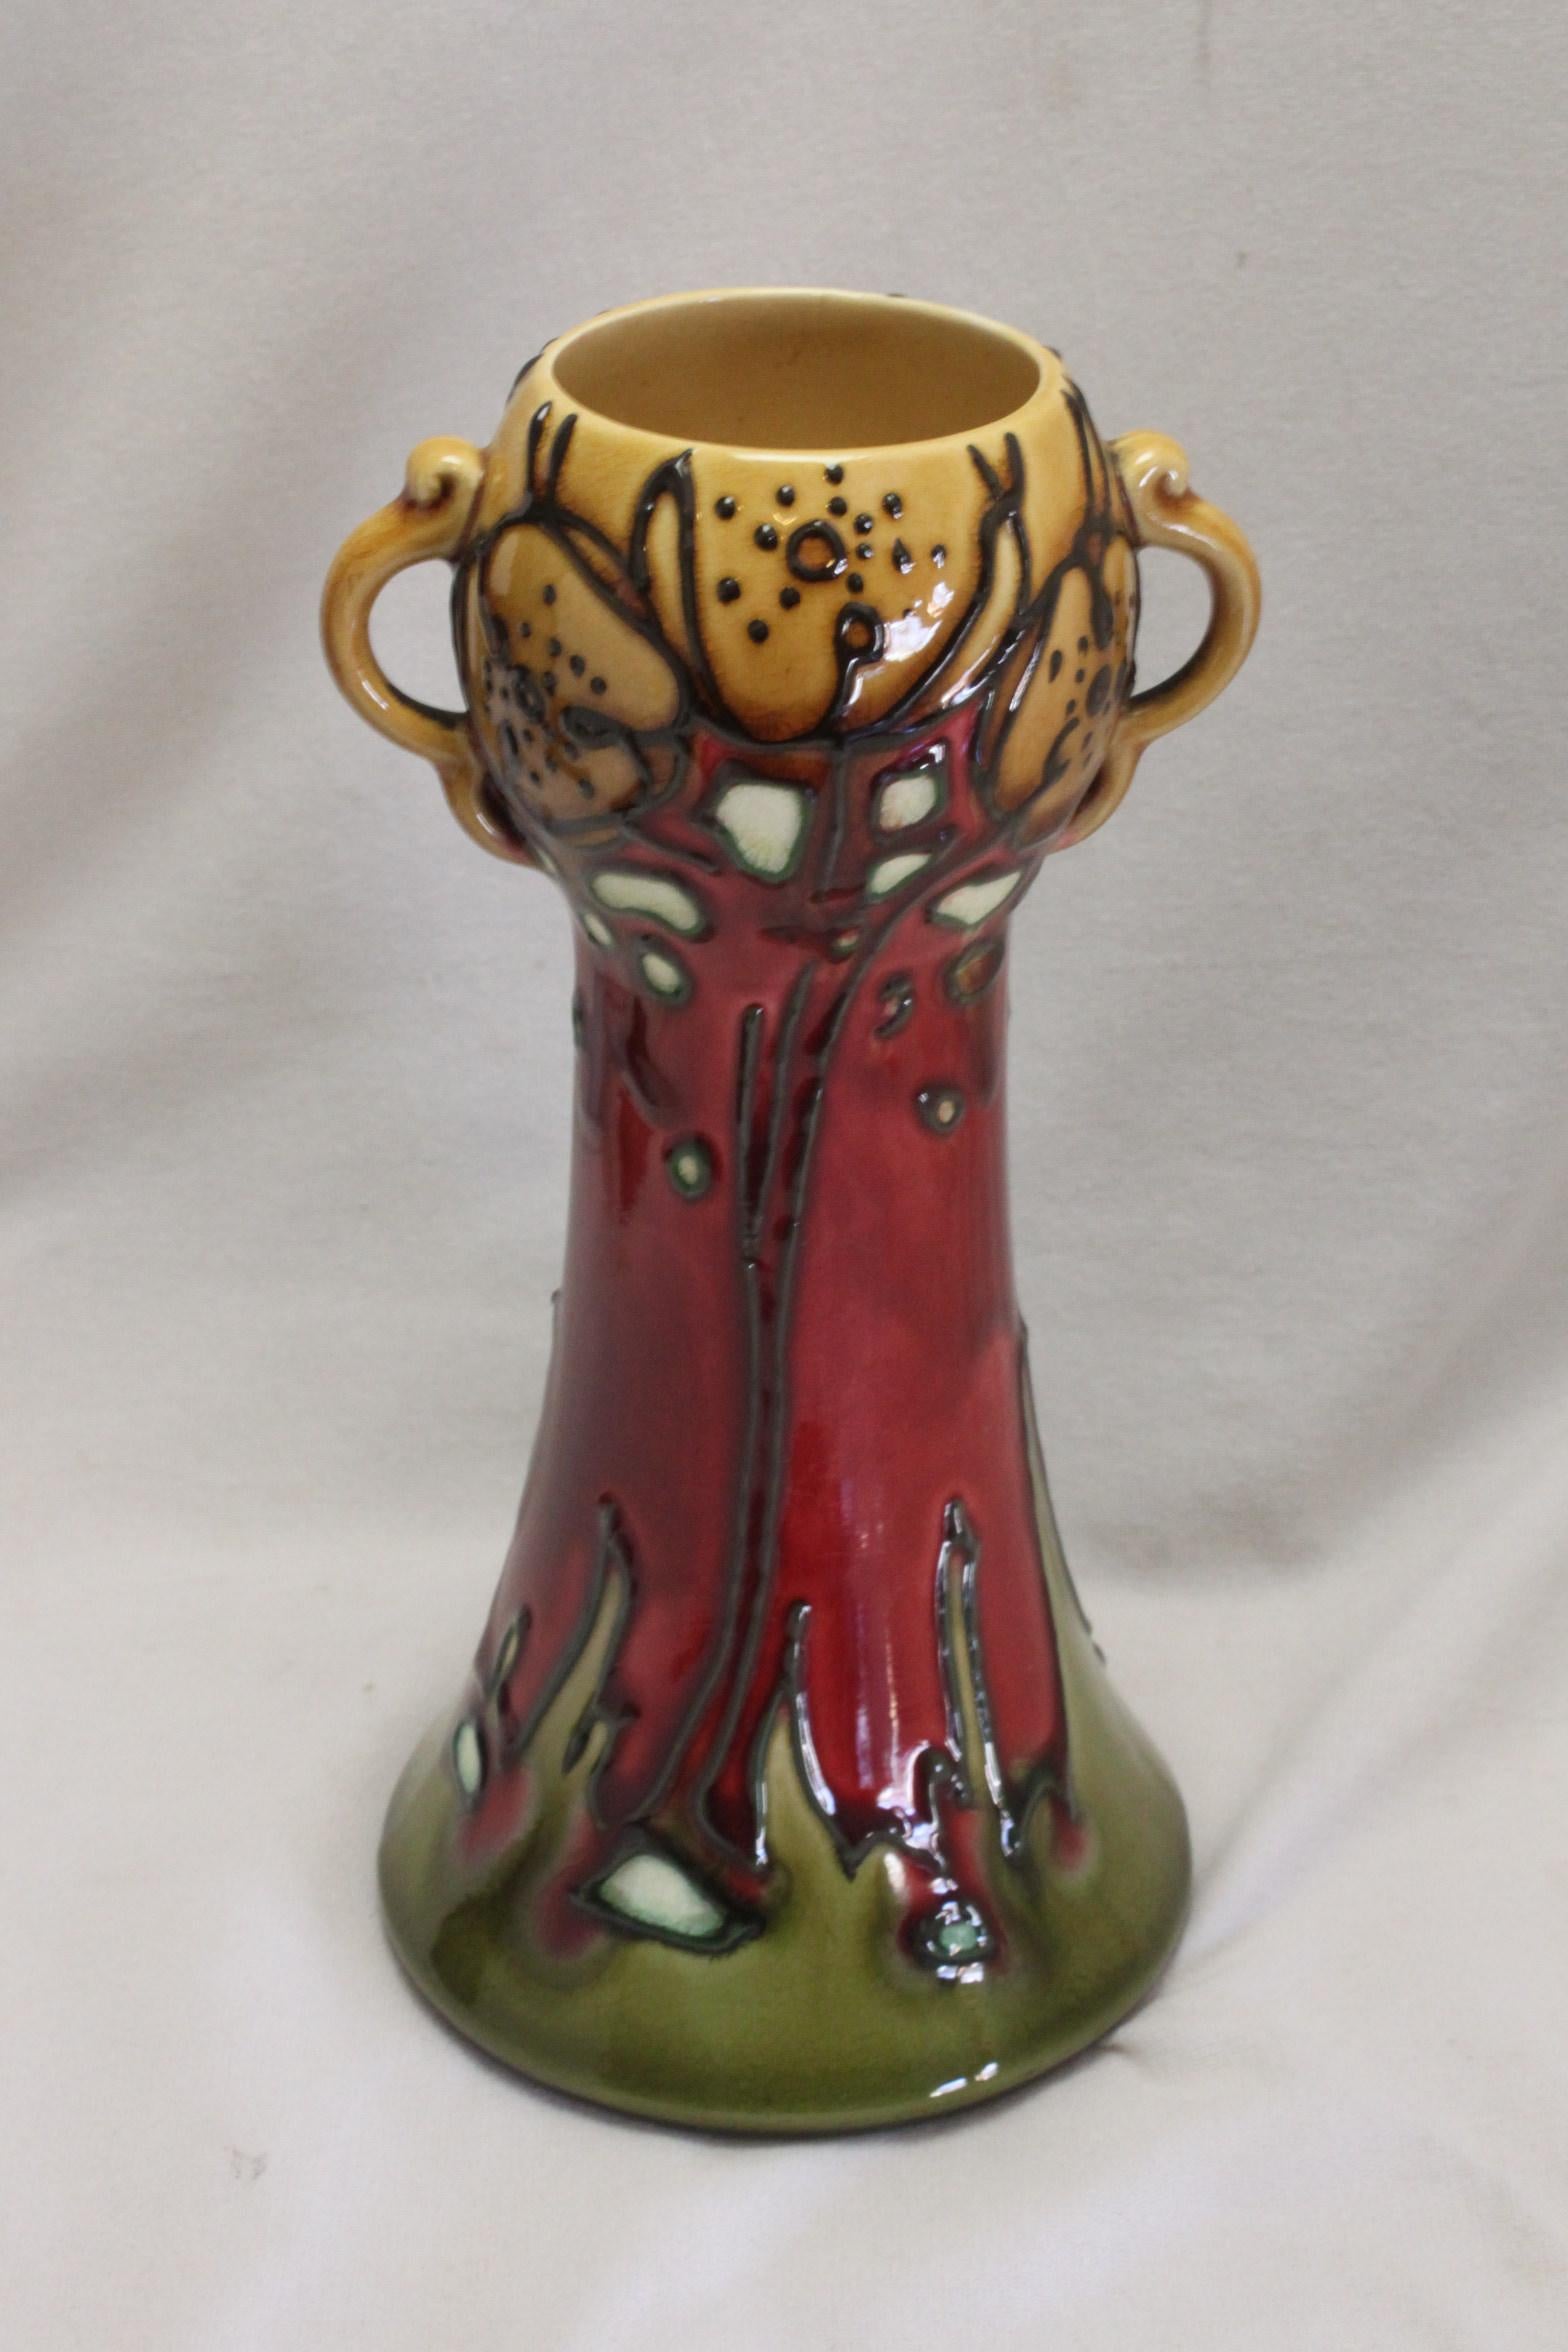 This Minton Secessionist ware vase stands 176 mm (7 inches) high, and has a diameter at the base of 90 mm (3.5 inches). This design is illustrated in the Minton Seccessionist catalogue of 1902 as vase number 41. Designed by John Wadsworth and Leon